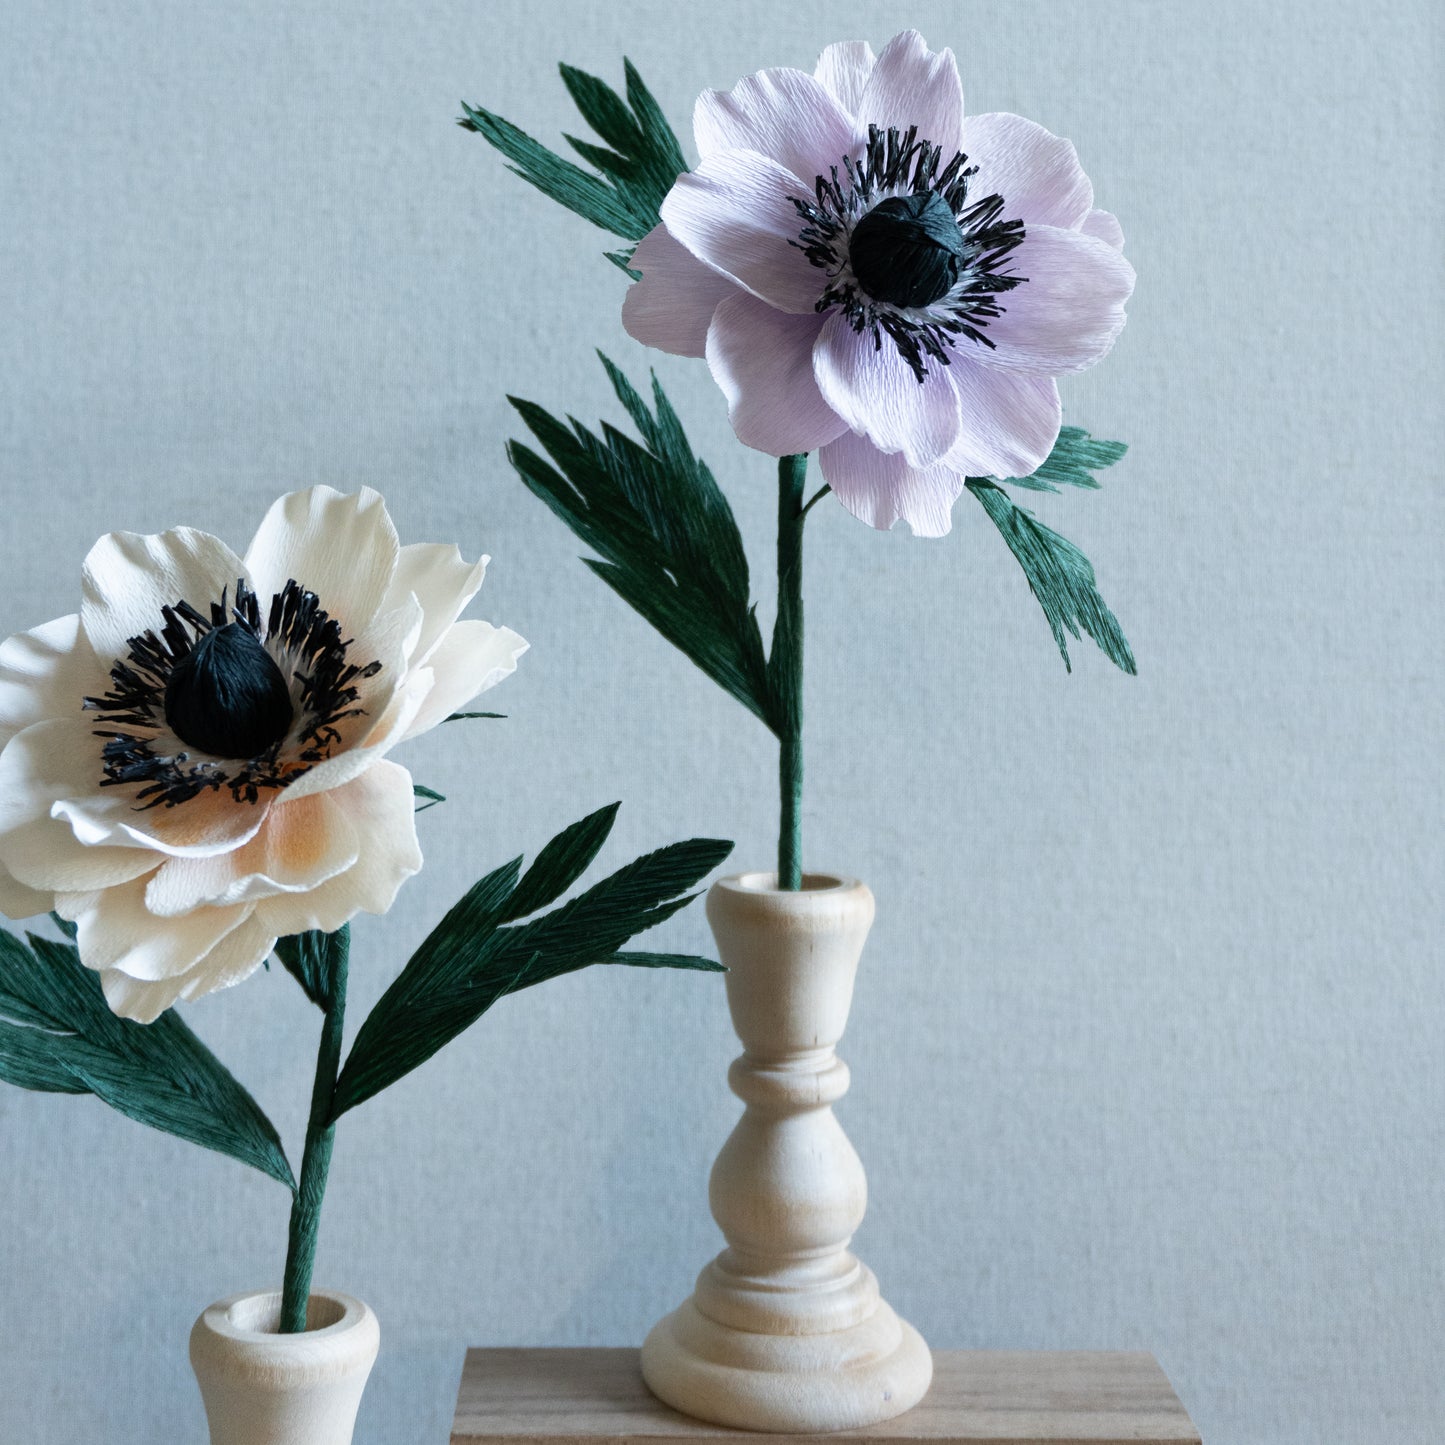 Handcrafted paper Anemone with premium Italian crepe paper. Colored with pastel and watercolour. available in white and lilac.